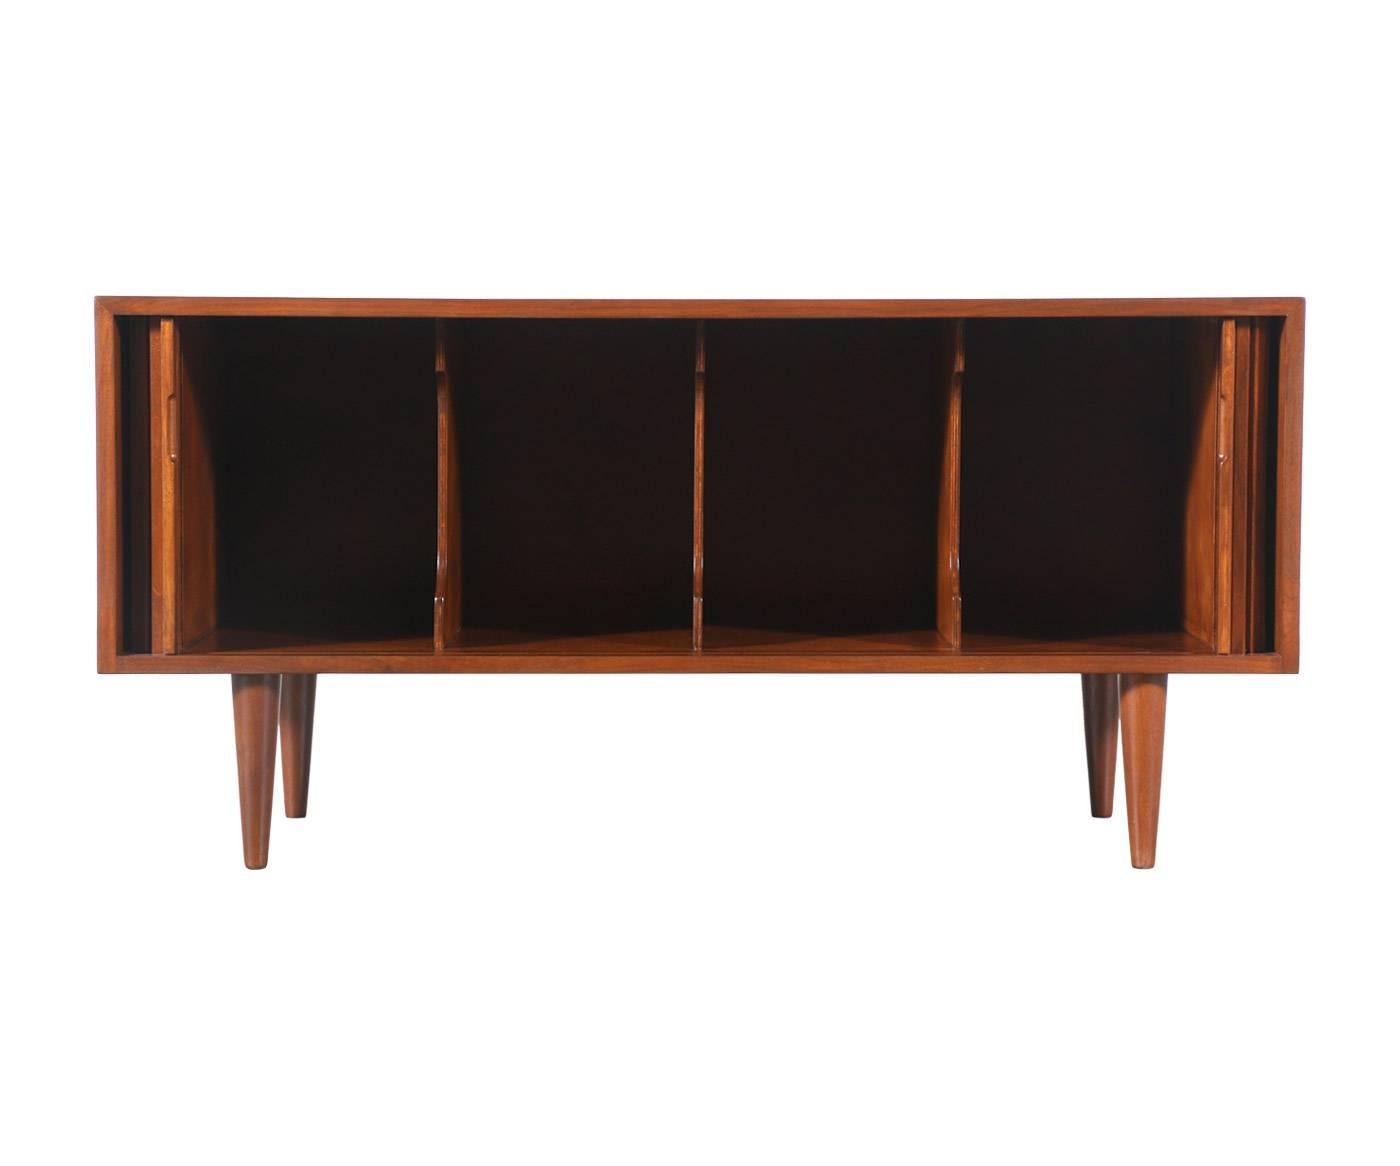 Designer: Milo Baughman.
Manufacturer: Glenn of California.
Period/Style: Mid-Century Modern.
Country: United States.
Date: 1950s.

Dimensions: 23″ H x 47.75″ W x 17.75″ D.
Materials: Walnut.
Condition: Excellent, newly refinished.
Number